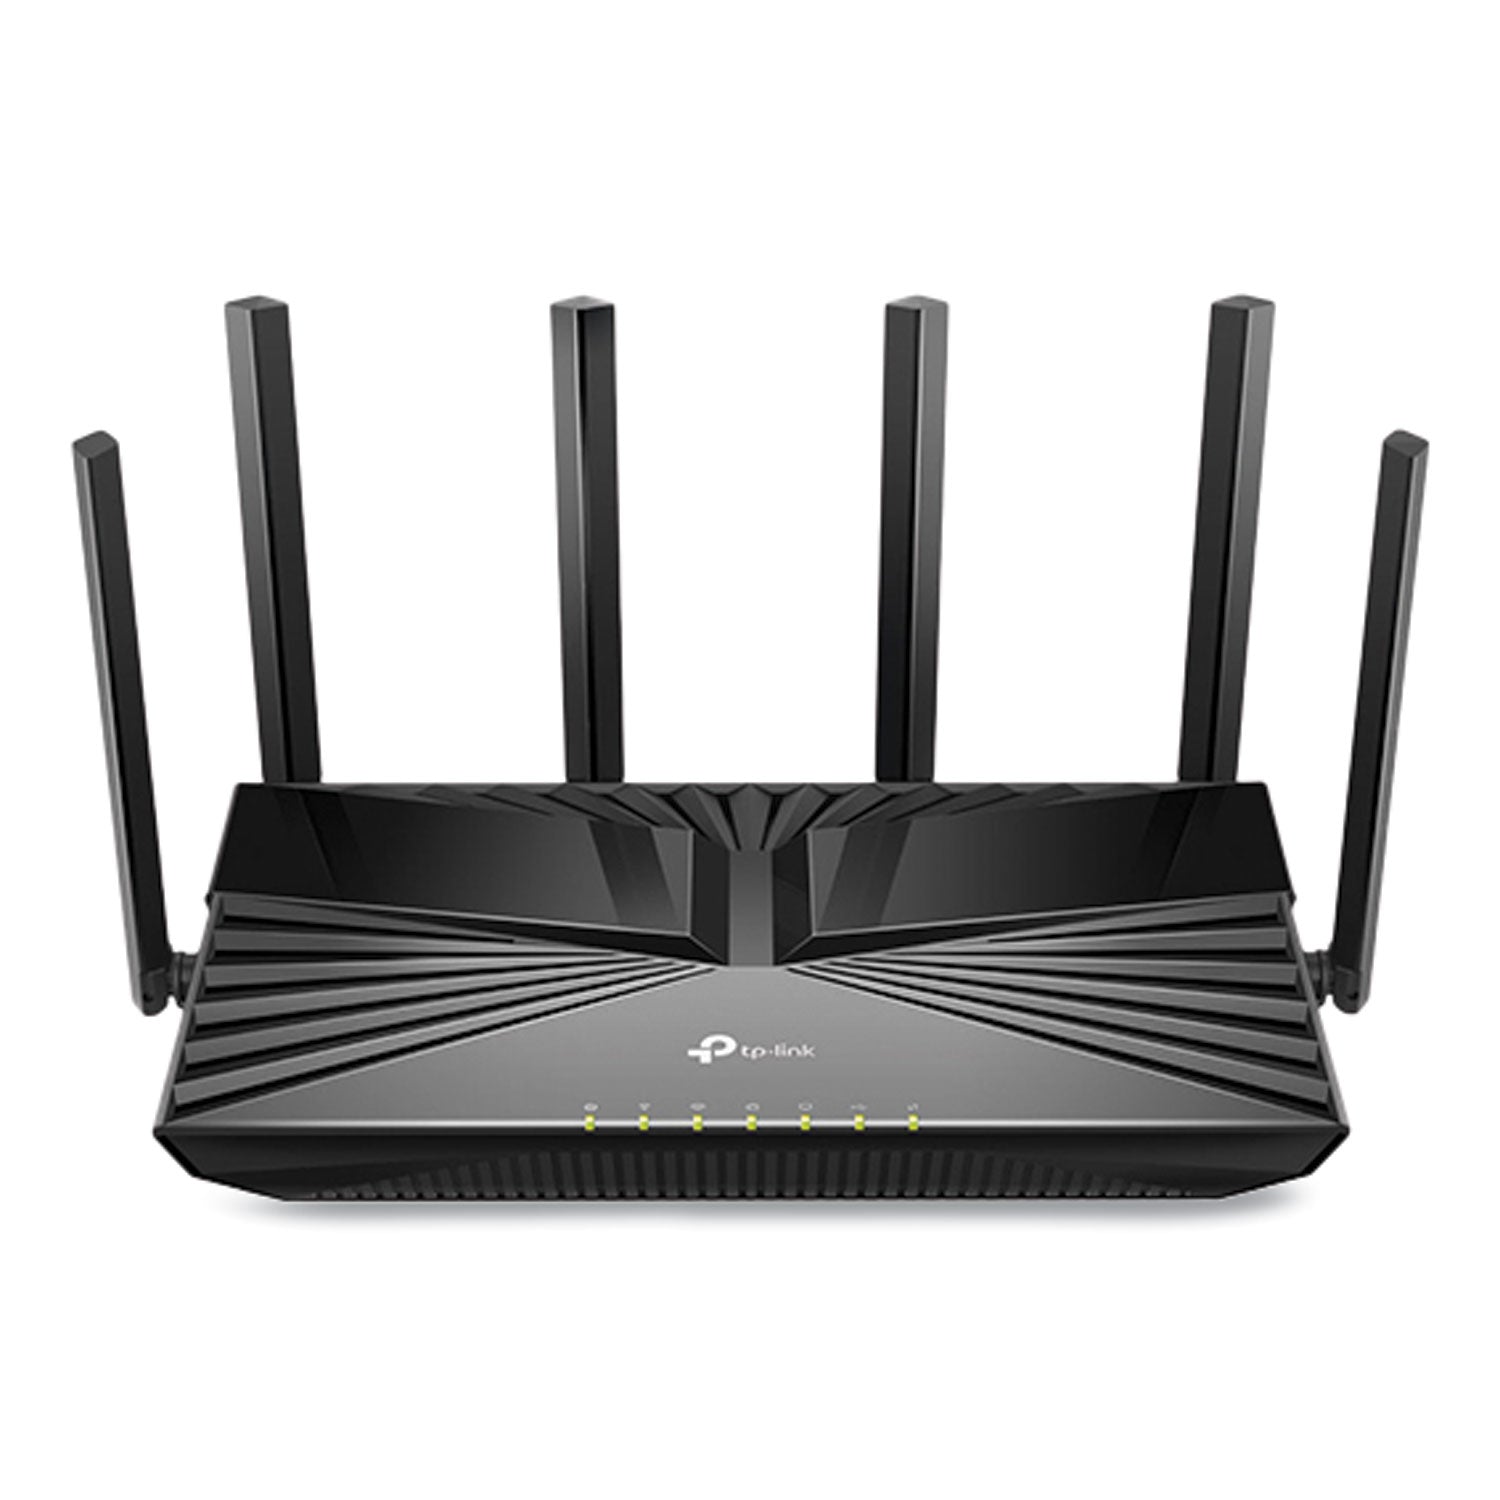 archer-ax4400-wireless-and-ethernet-router-5-ports-dual-band-24-ghz-5-ghz_tplarcherax4400 - 1